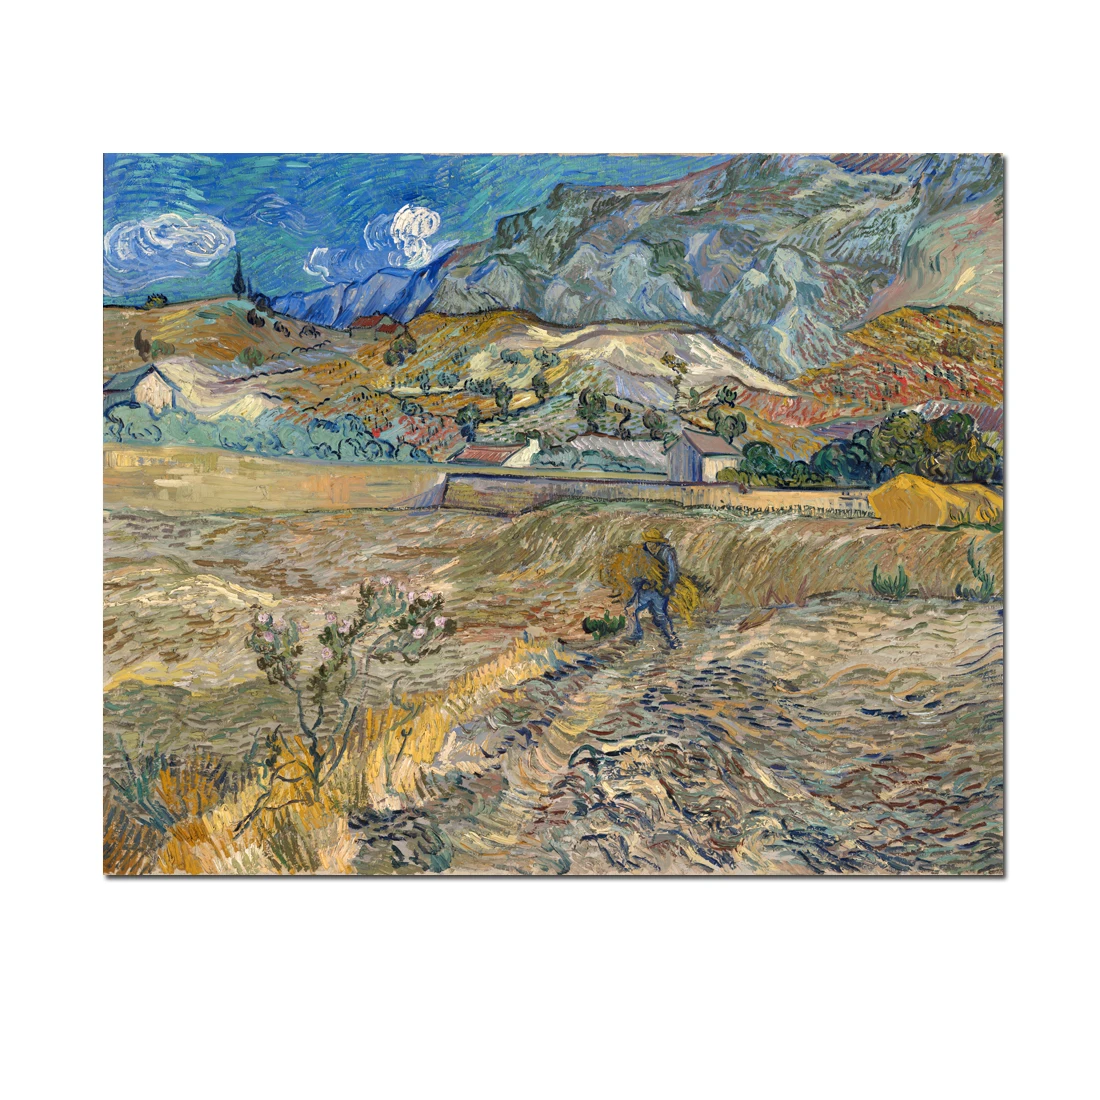 

Enclosed Field with Peasant Landscape by Van Gogh Hand Painted Oil Painting Reproduction Artwork Canvas Art Wall Decor